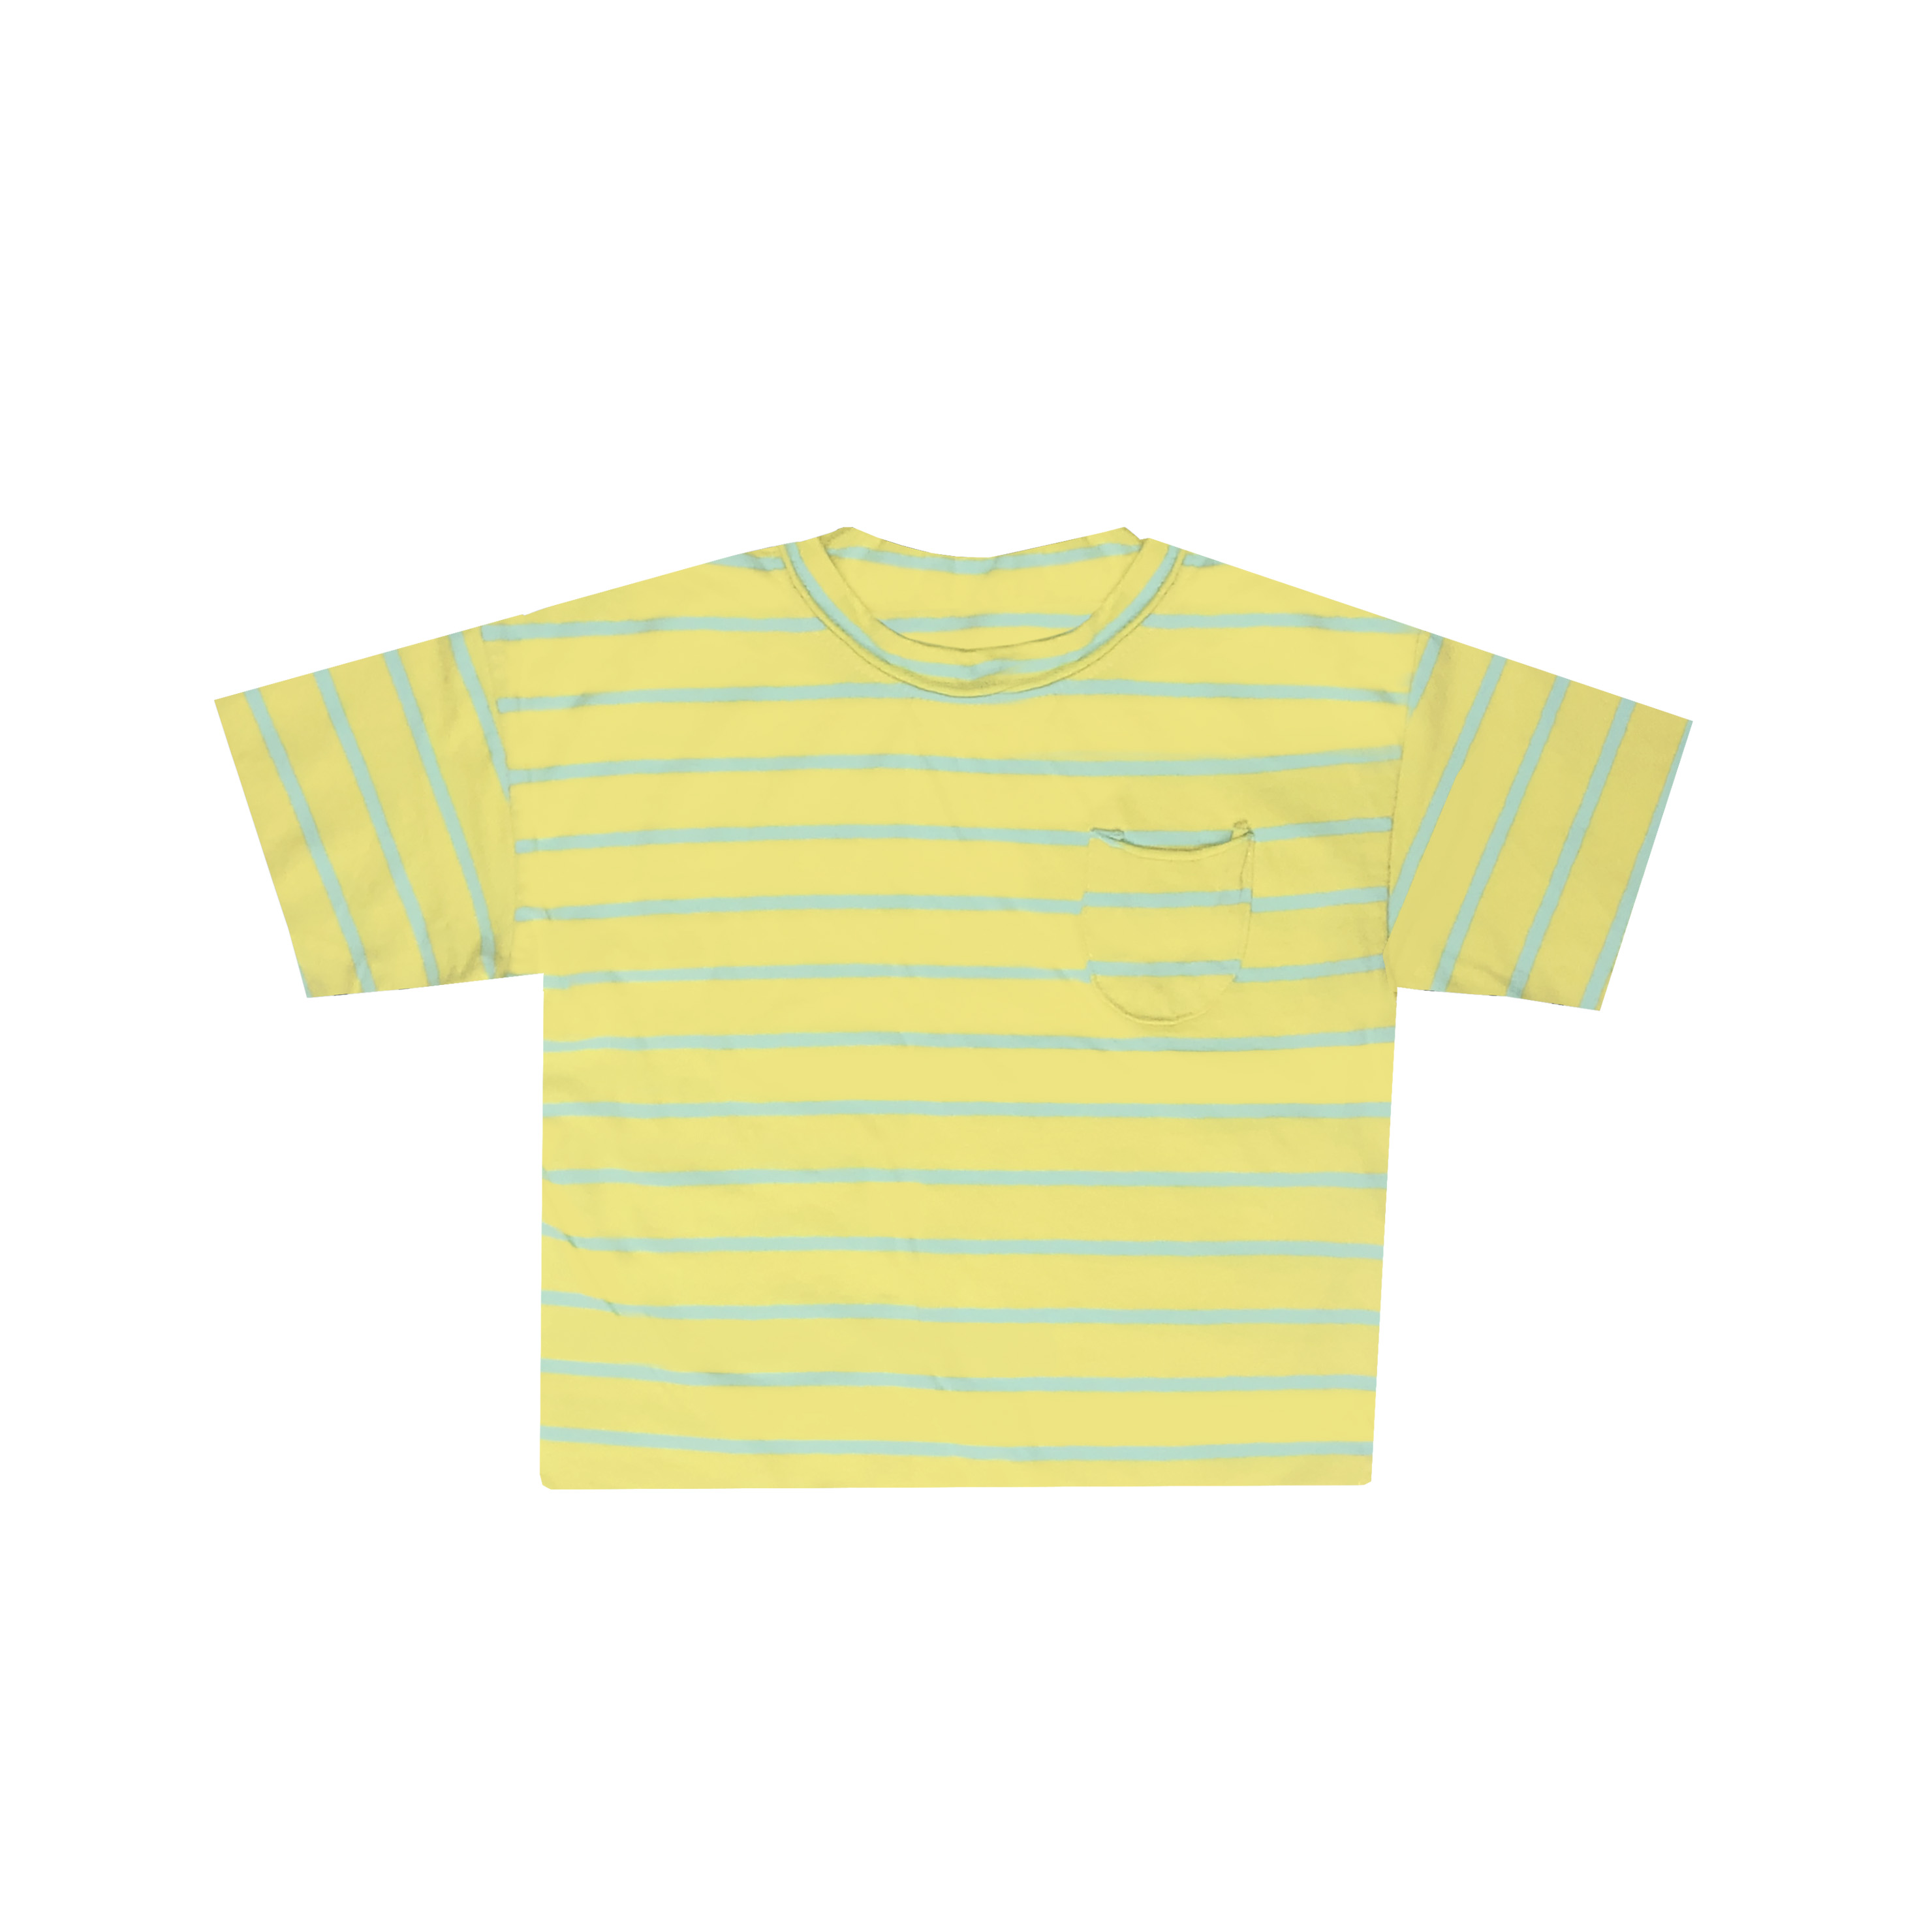 blue and yellow graphic tee